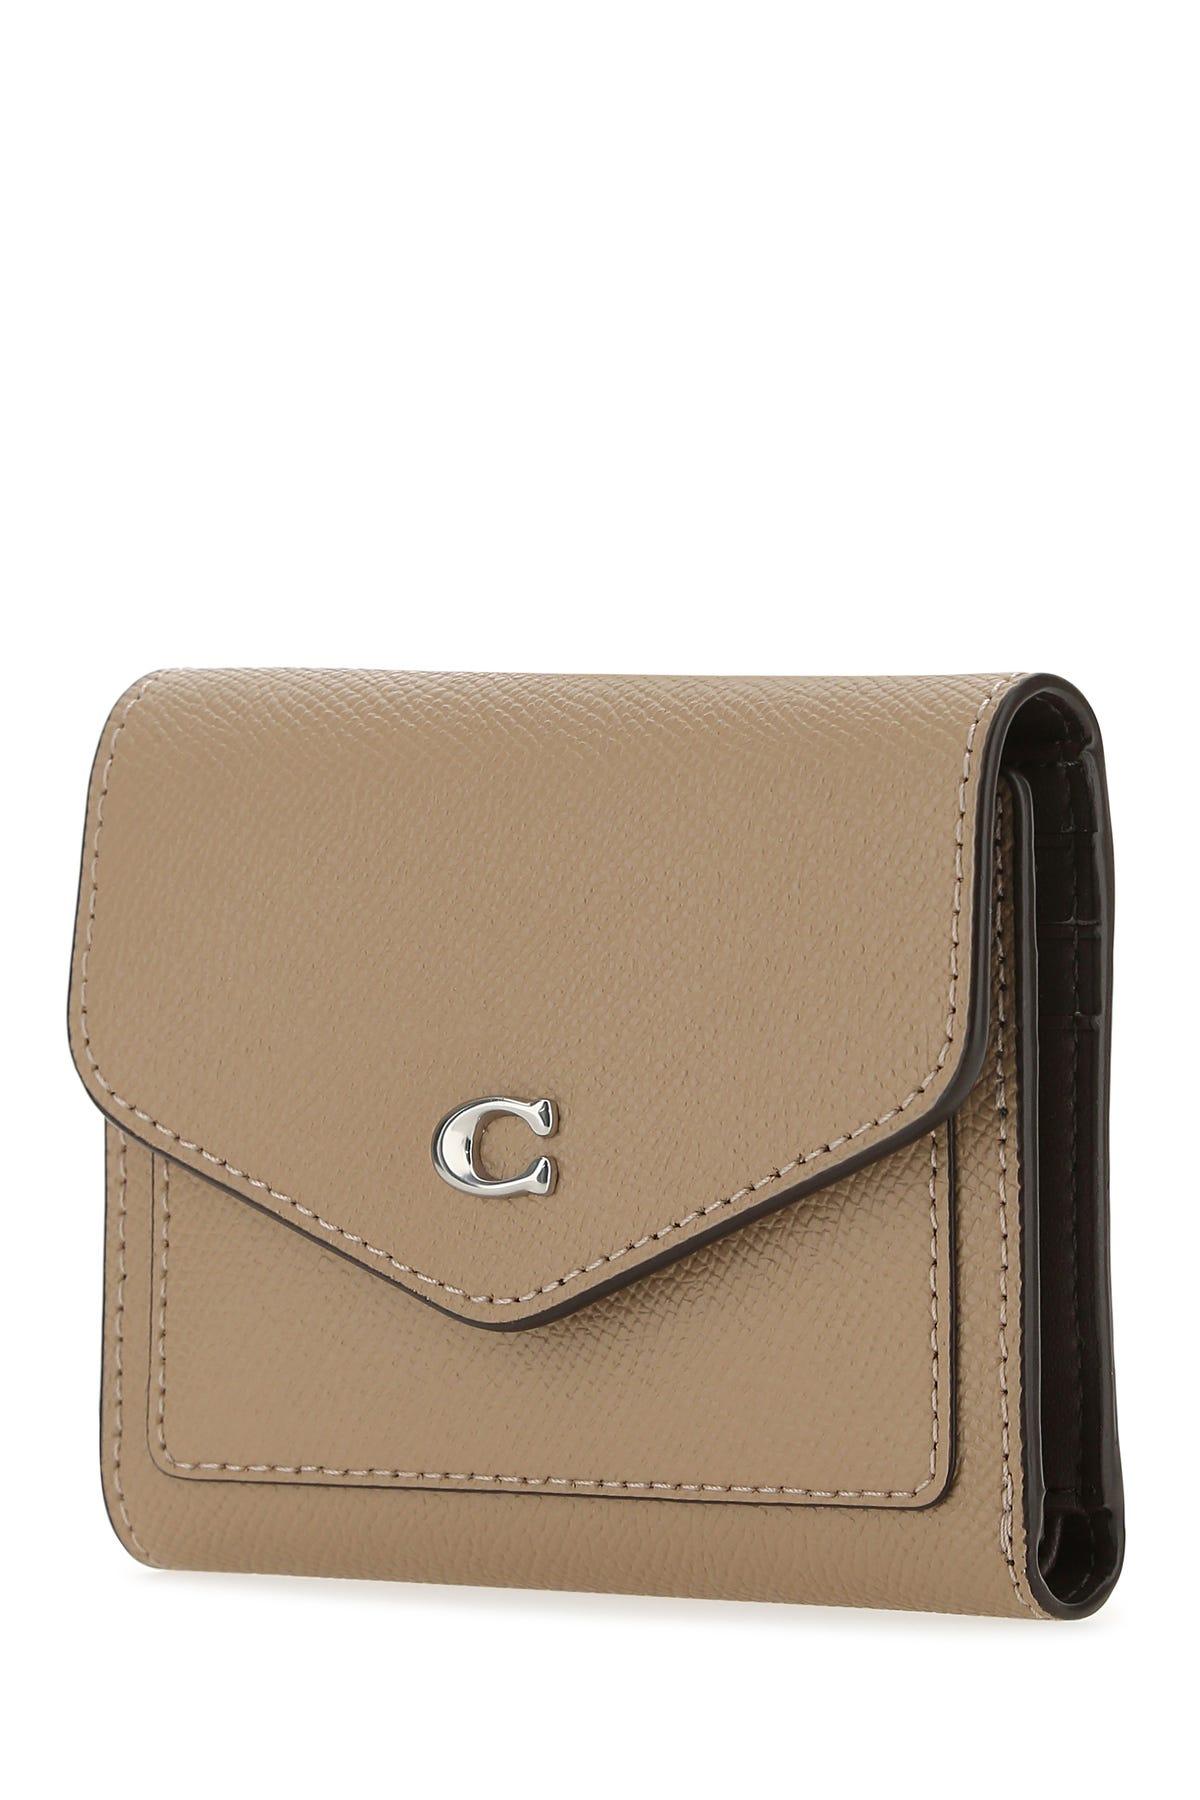 COACH Wyn Small Wallet in Natural | Lyst